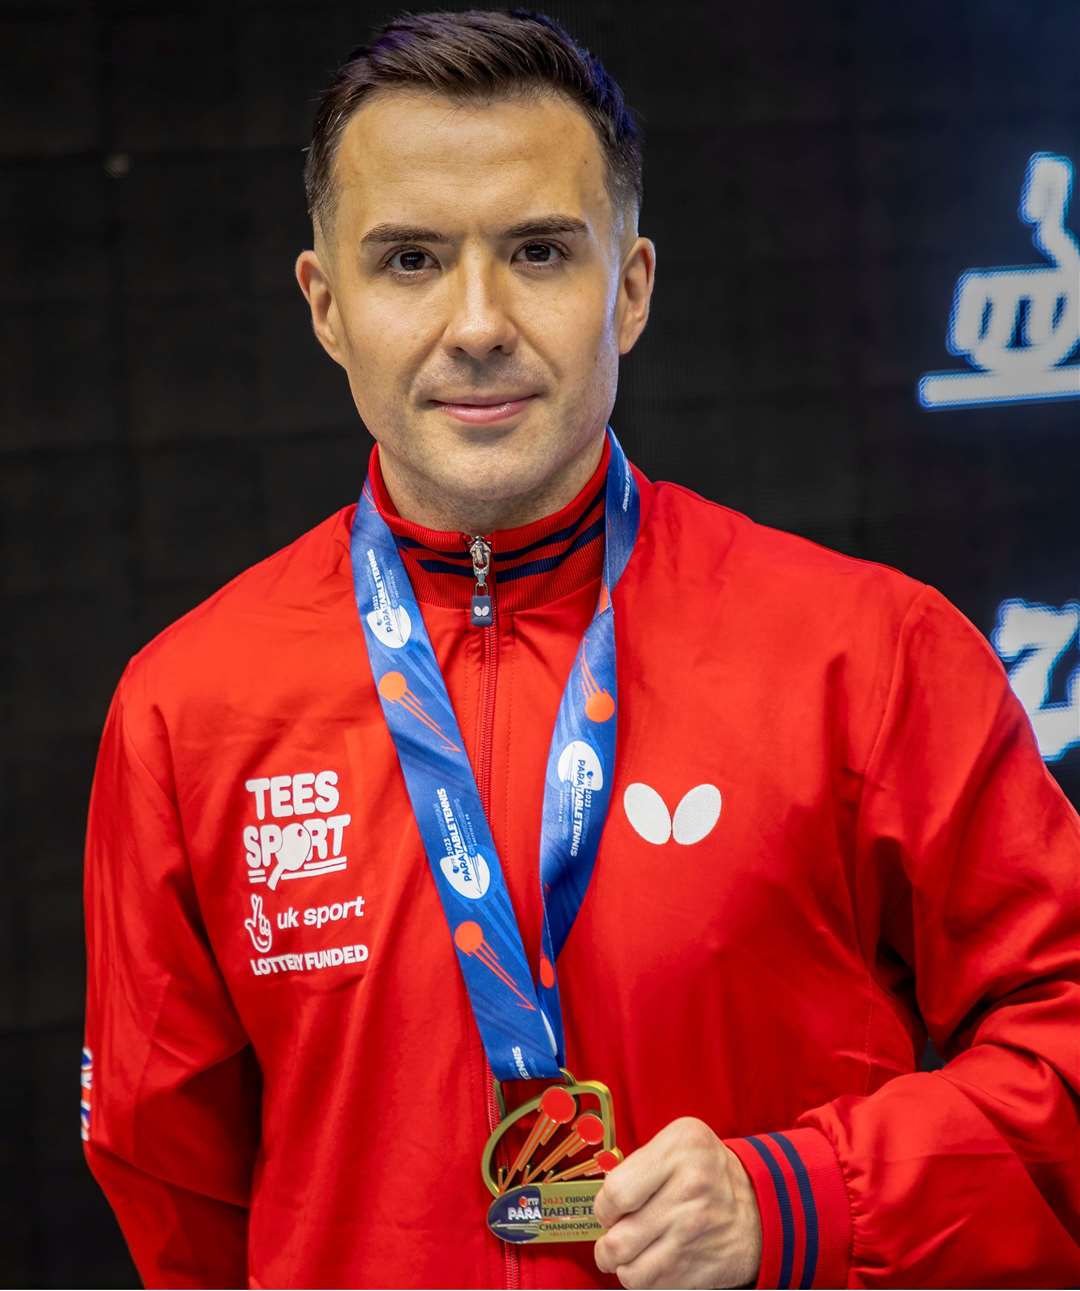 Will Bayley with his singles gold at Sheffield. Picture: Michael Loveder